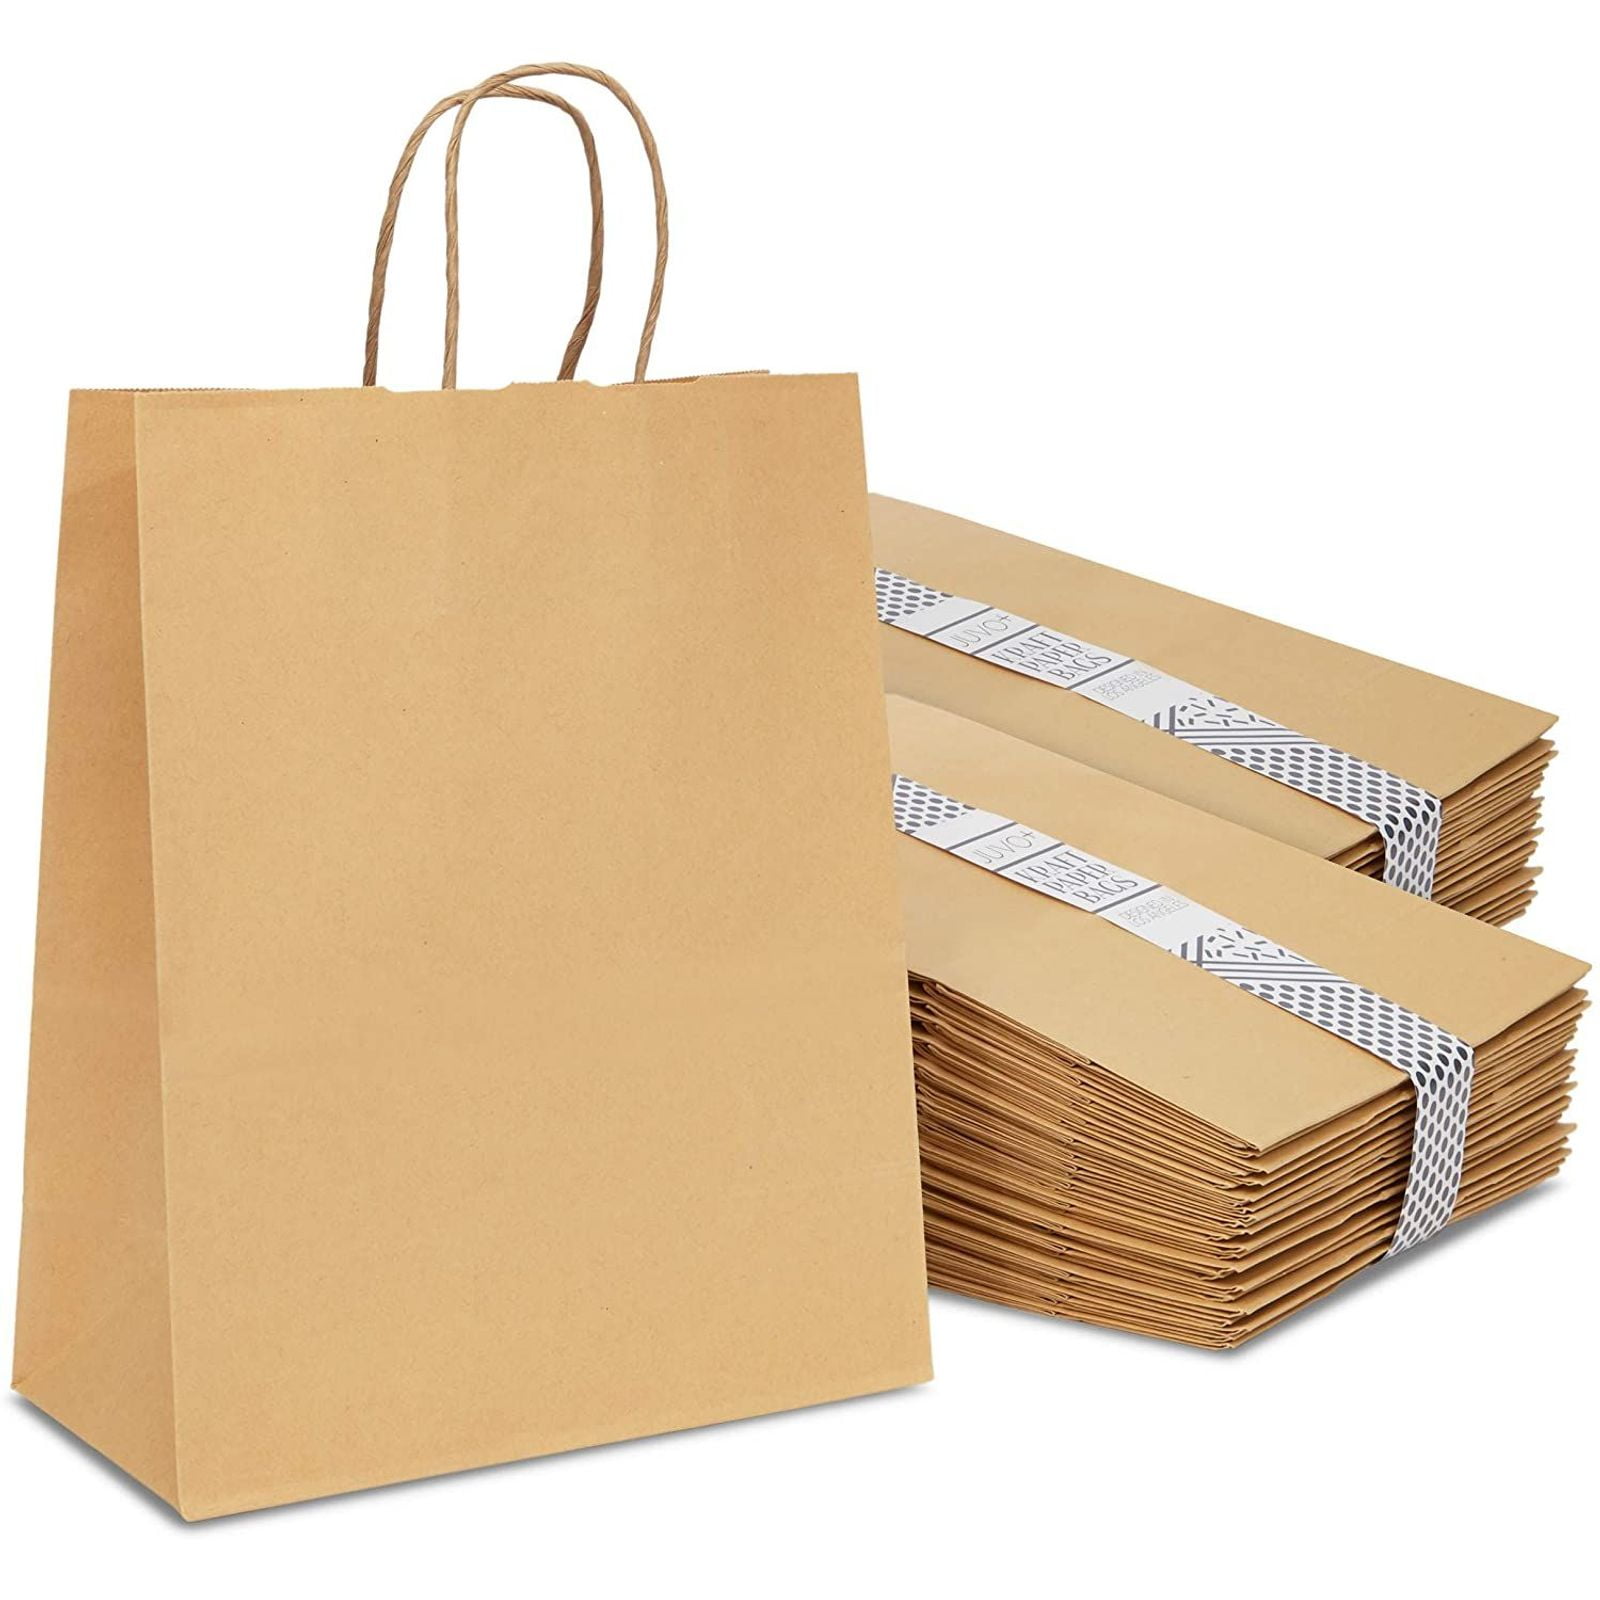 Details about    100 Bags} Brown Kraft Paper Shopping With Handles.- 8x4.5x10.5 